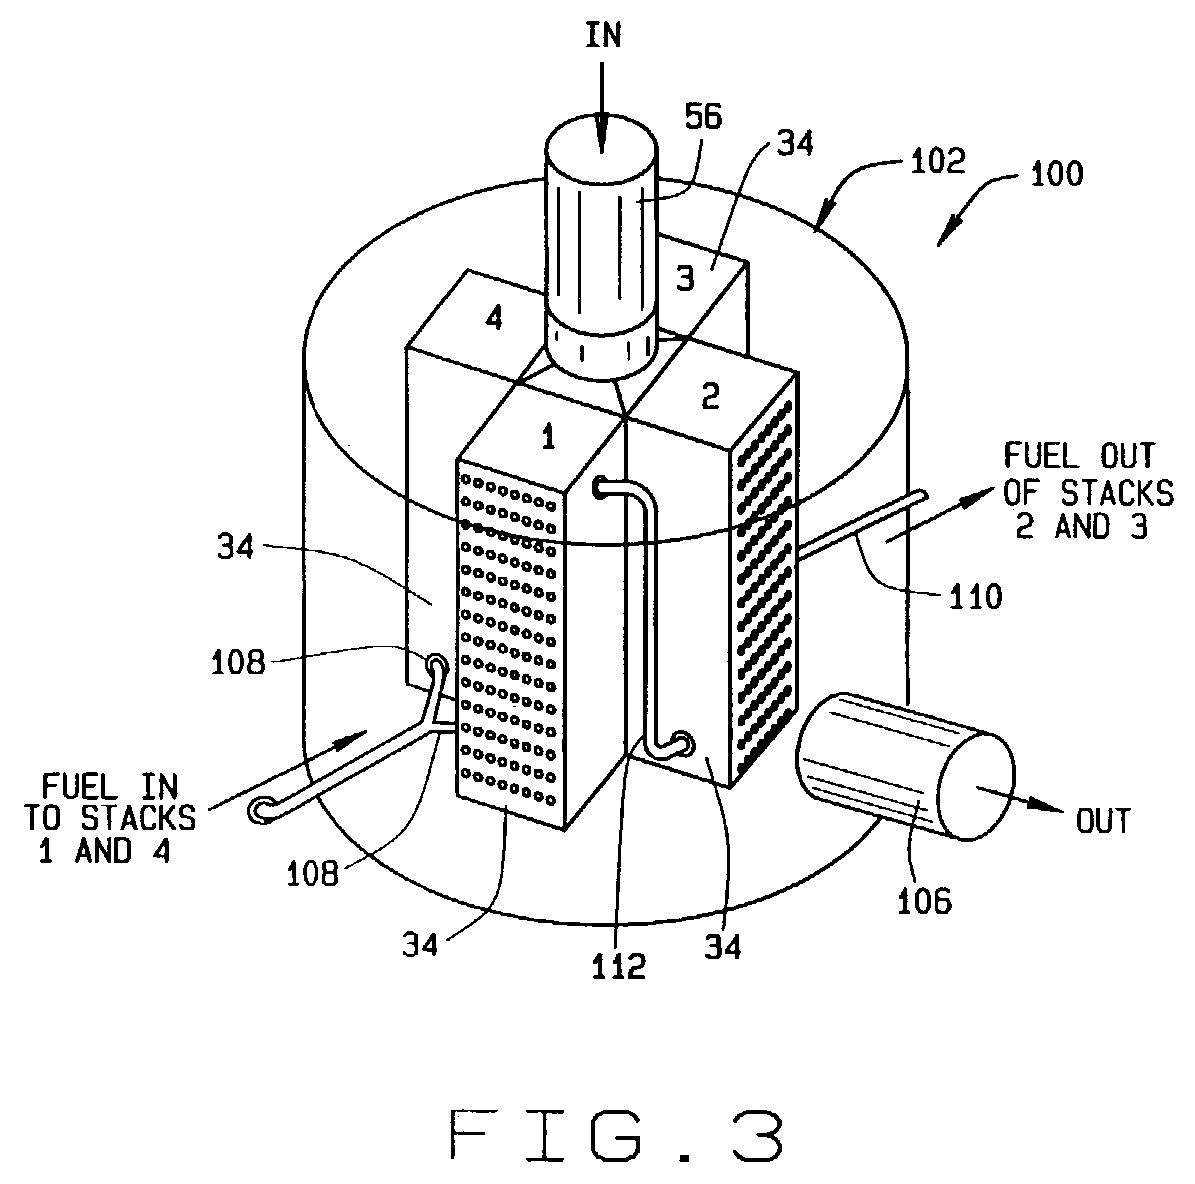 Integrated fuel cell hybrid power plant with re-circulated air and fuel flow